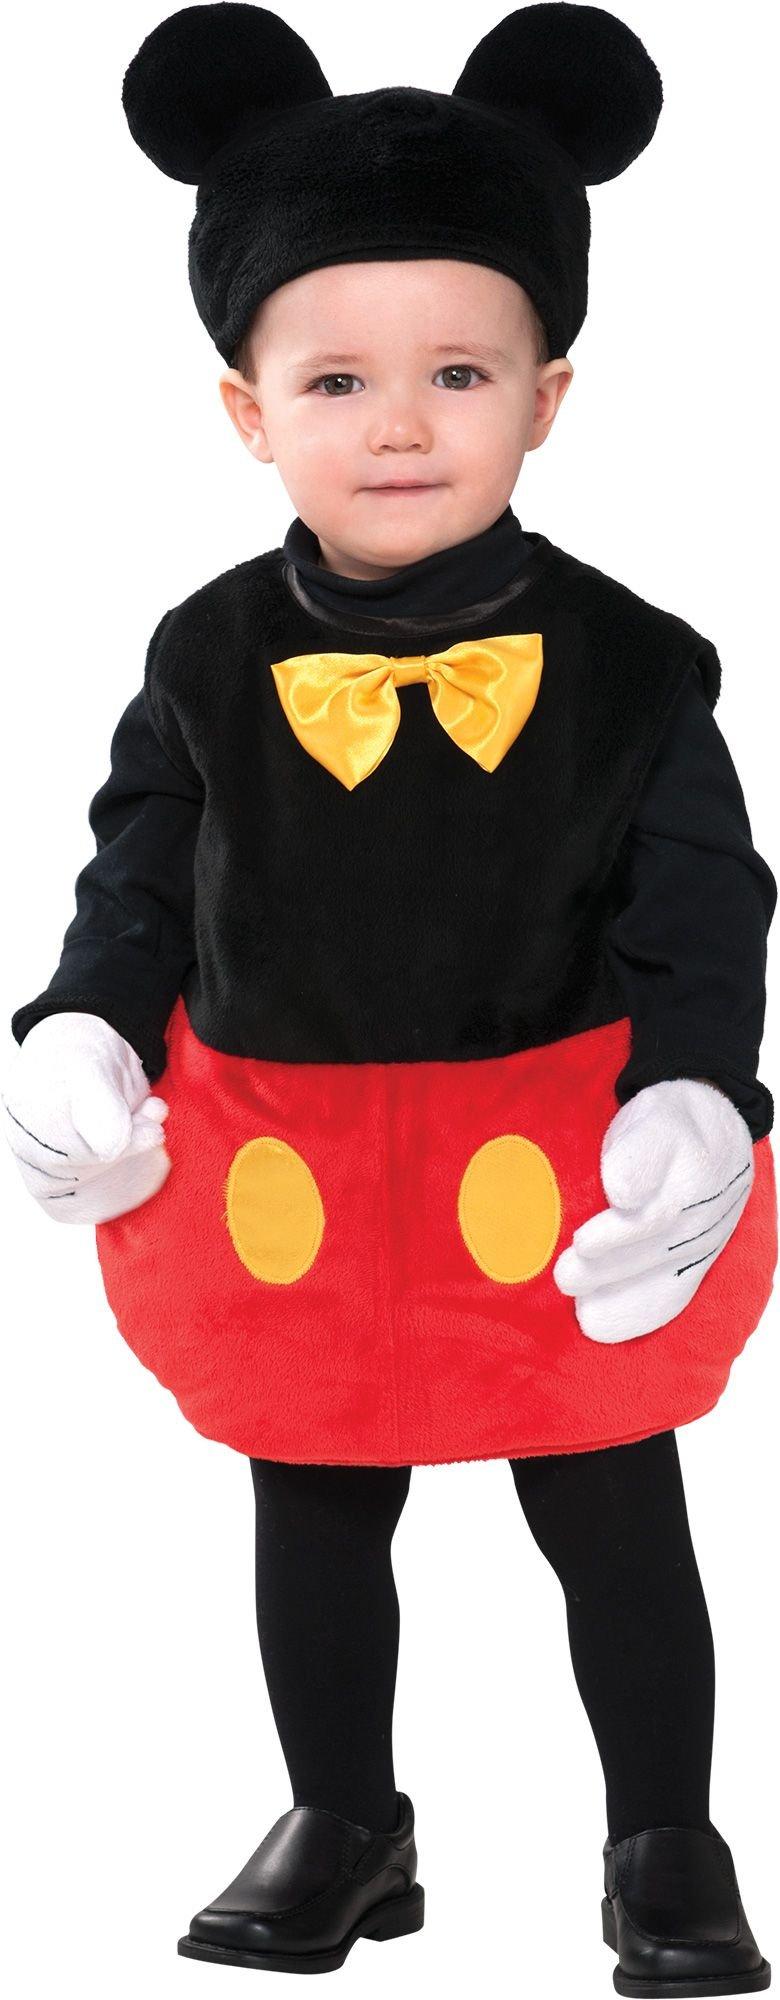 Baby Disney Mickey Mouse Costume | Party City